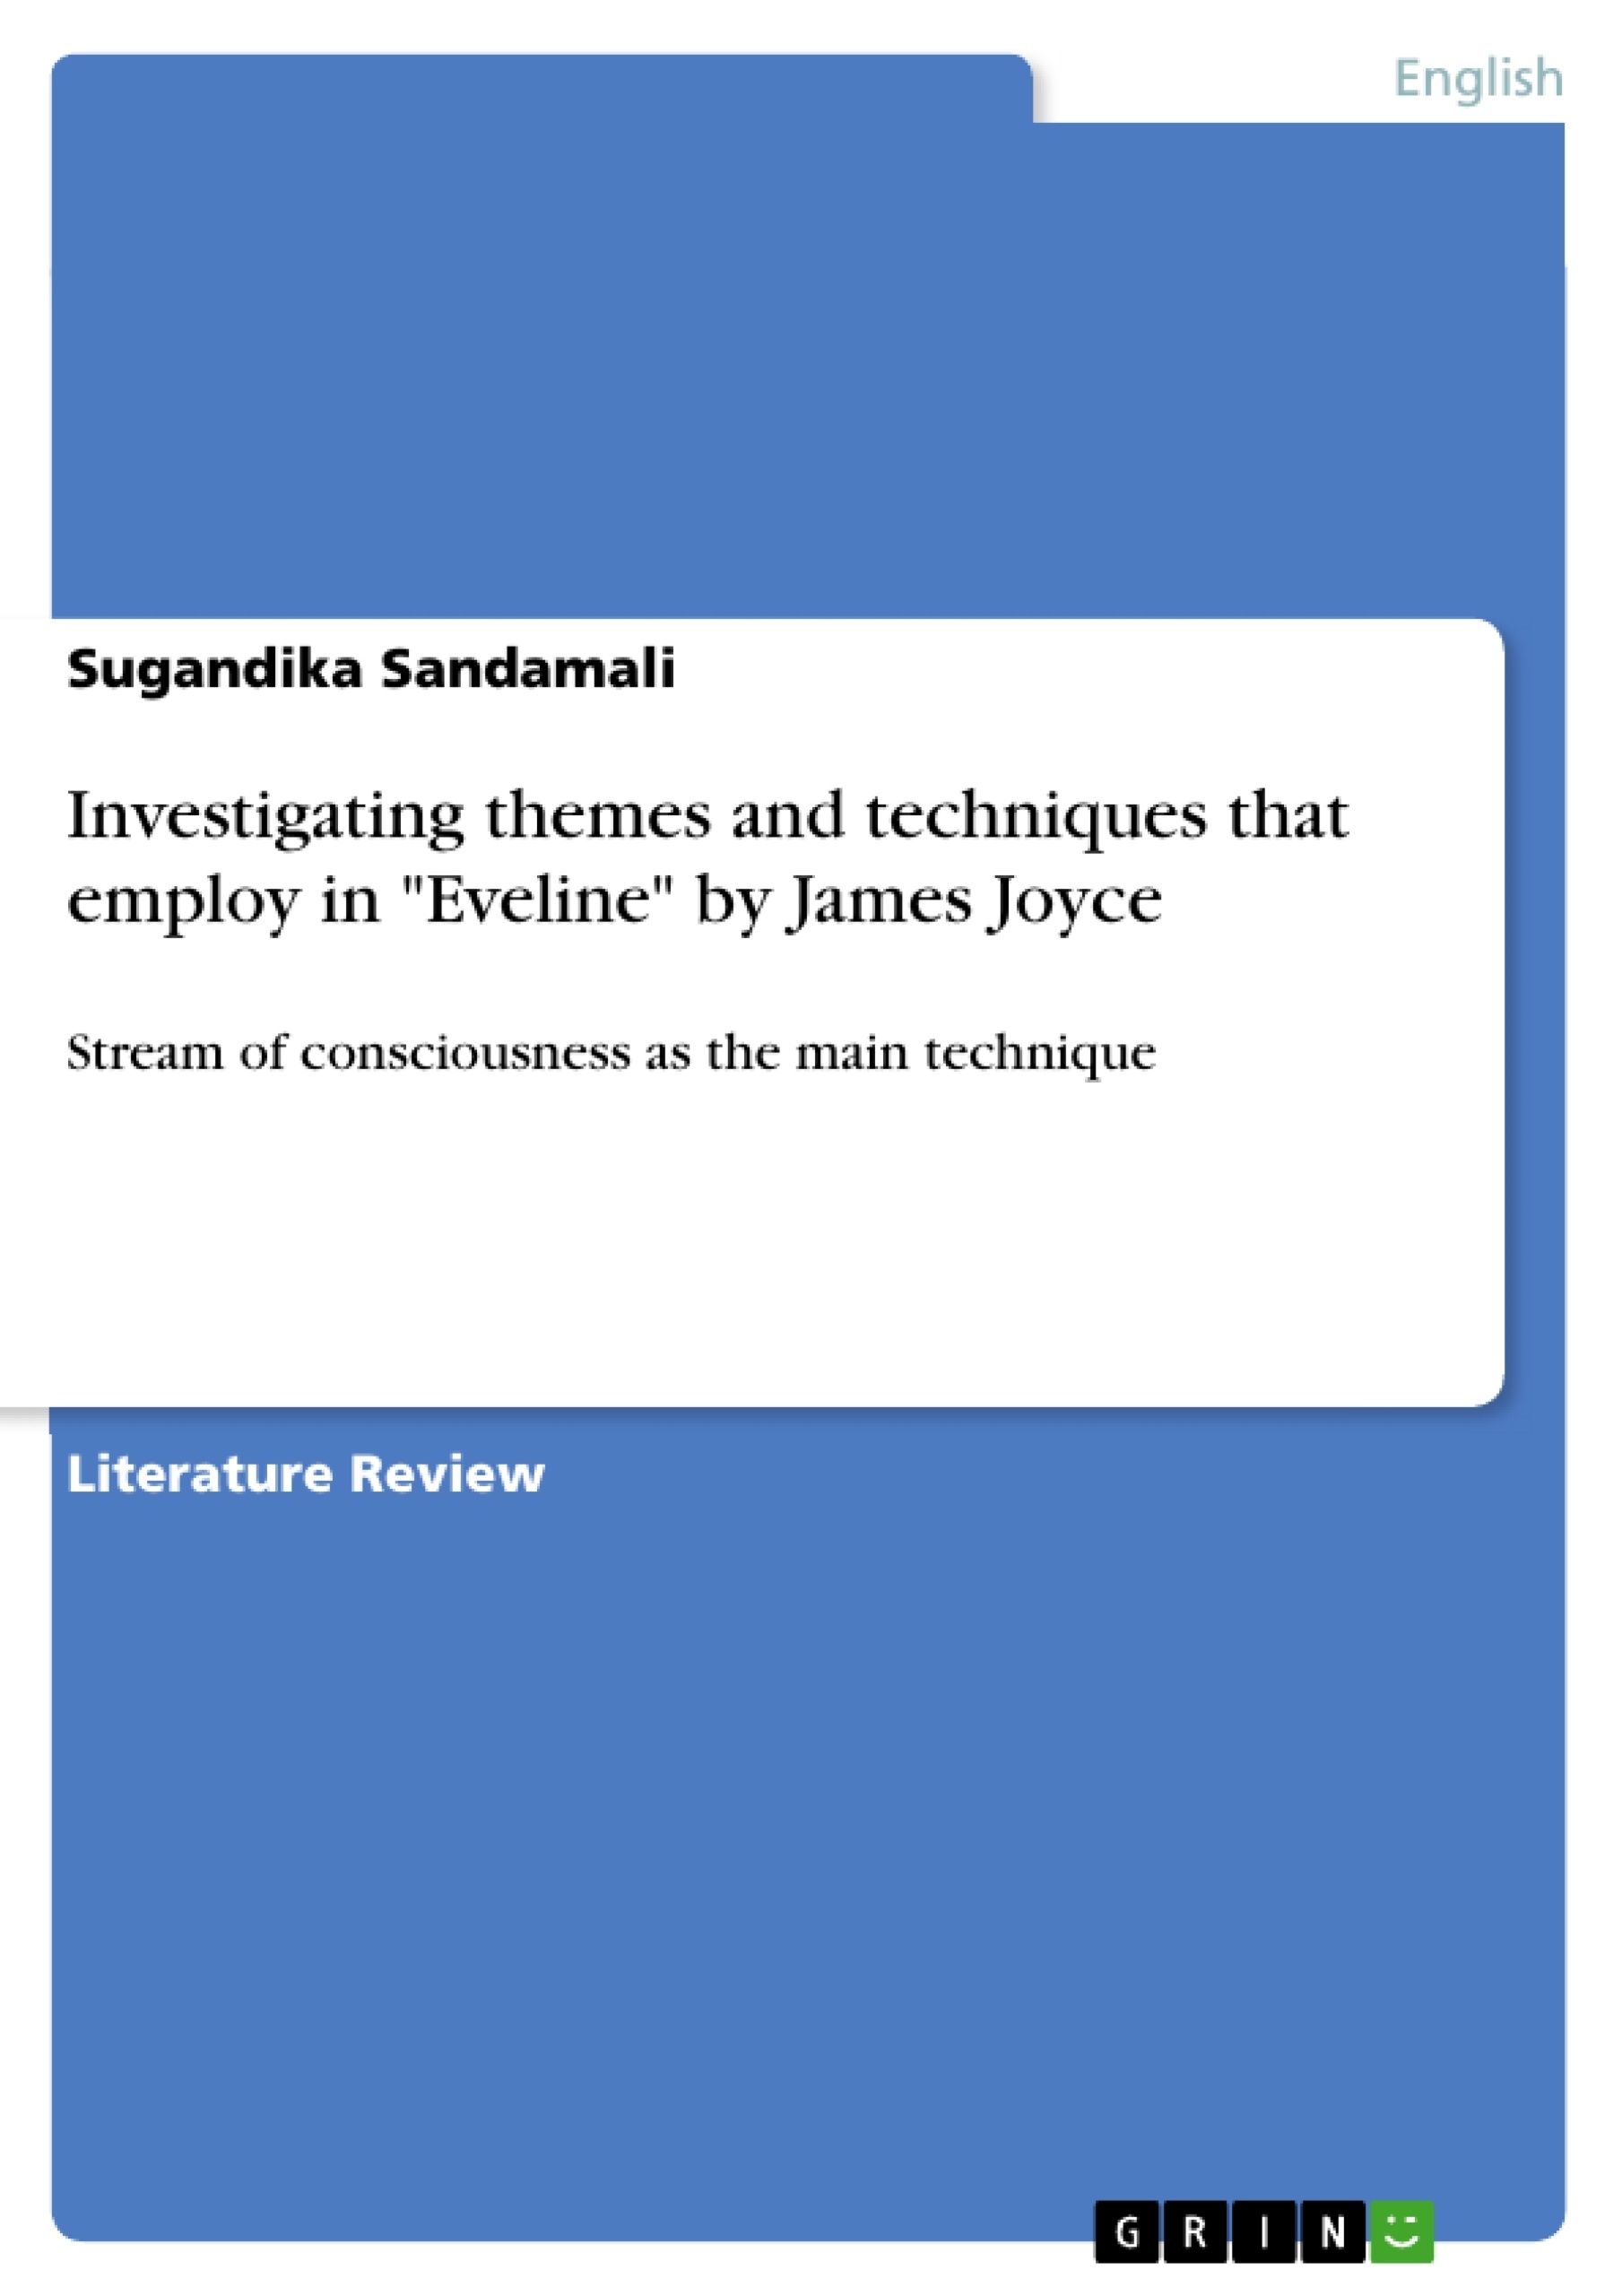 Título: Investigating themes and techniques that employ in "Eveline" by James Joyce